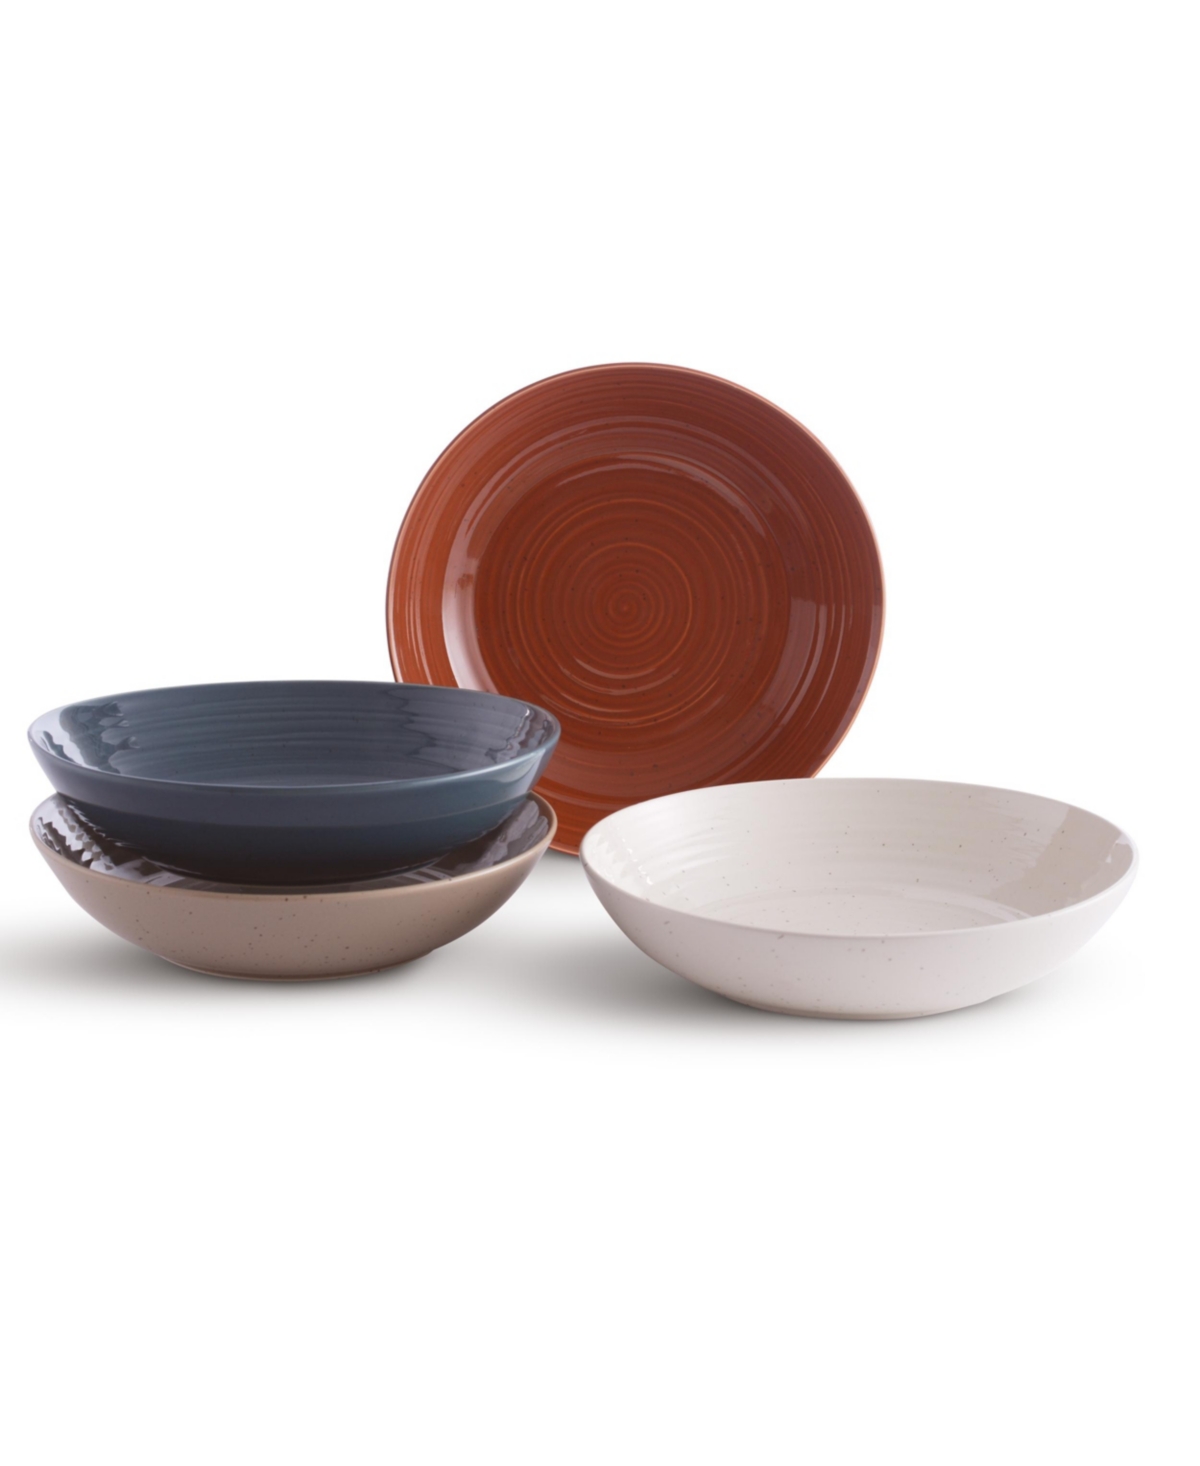 Siterra Painters Palette Mixed Dinner Bowls, Set of 4 - Assorted